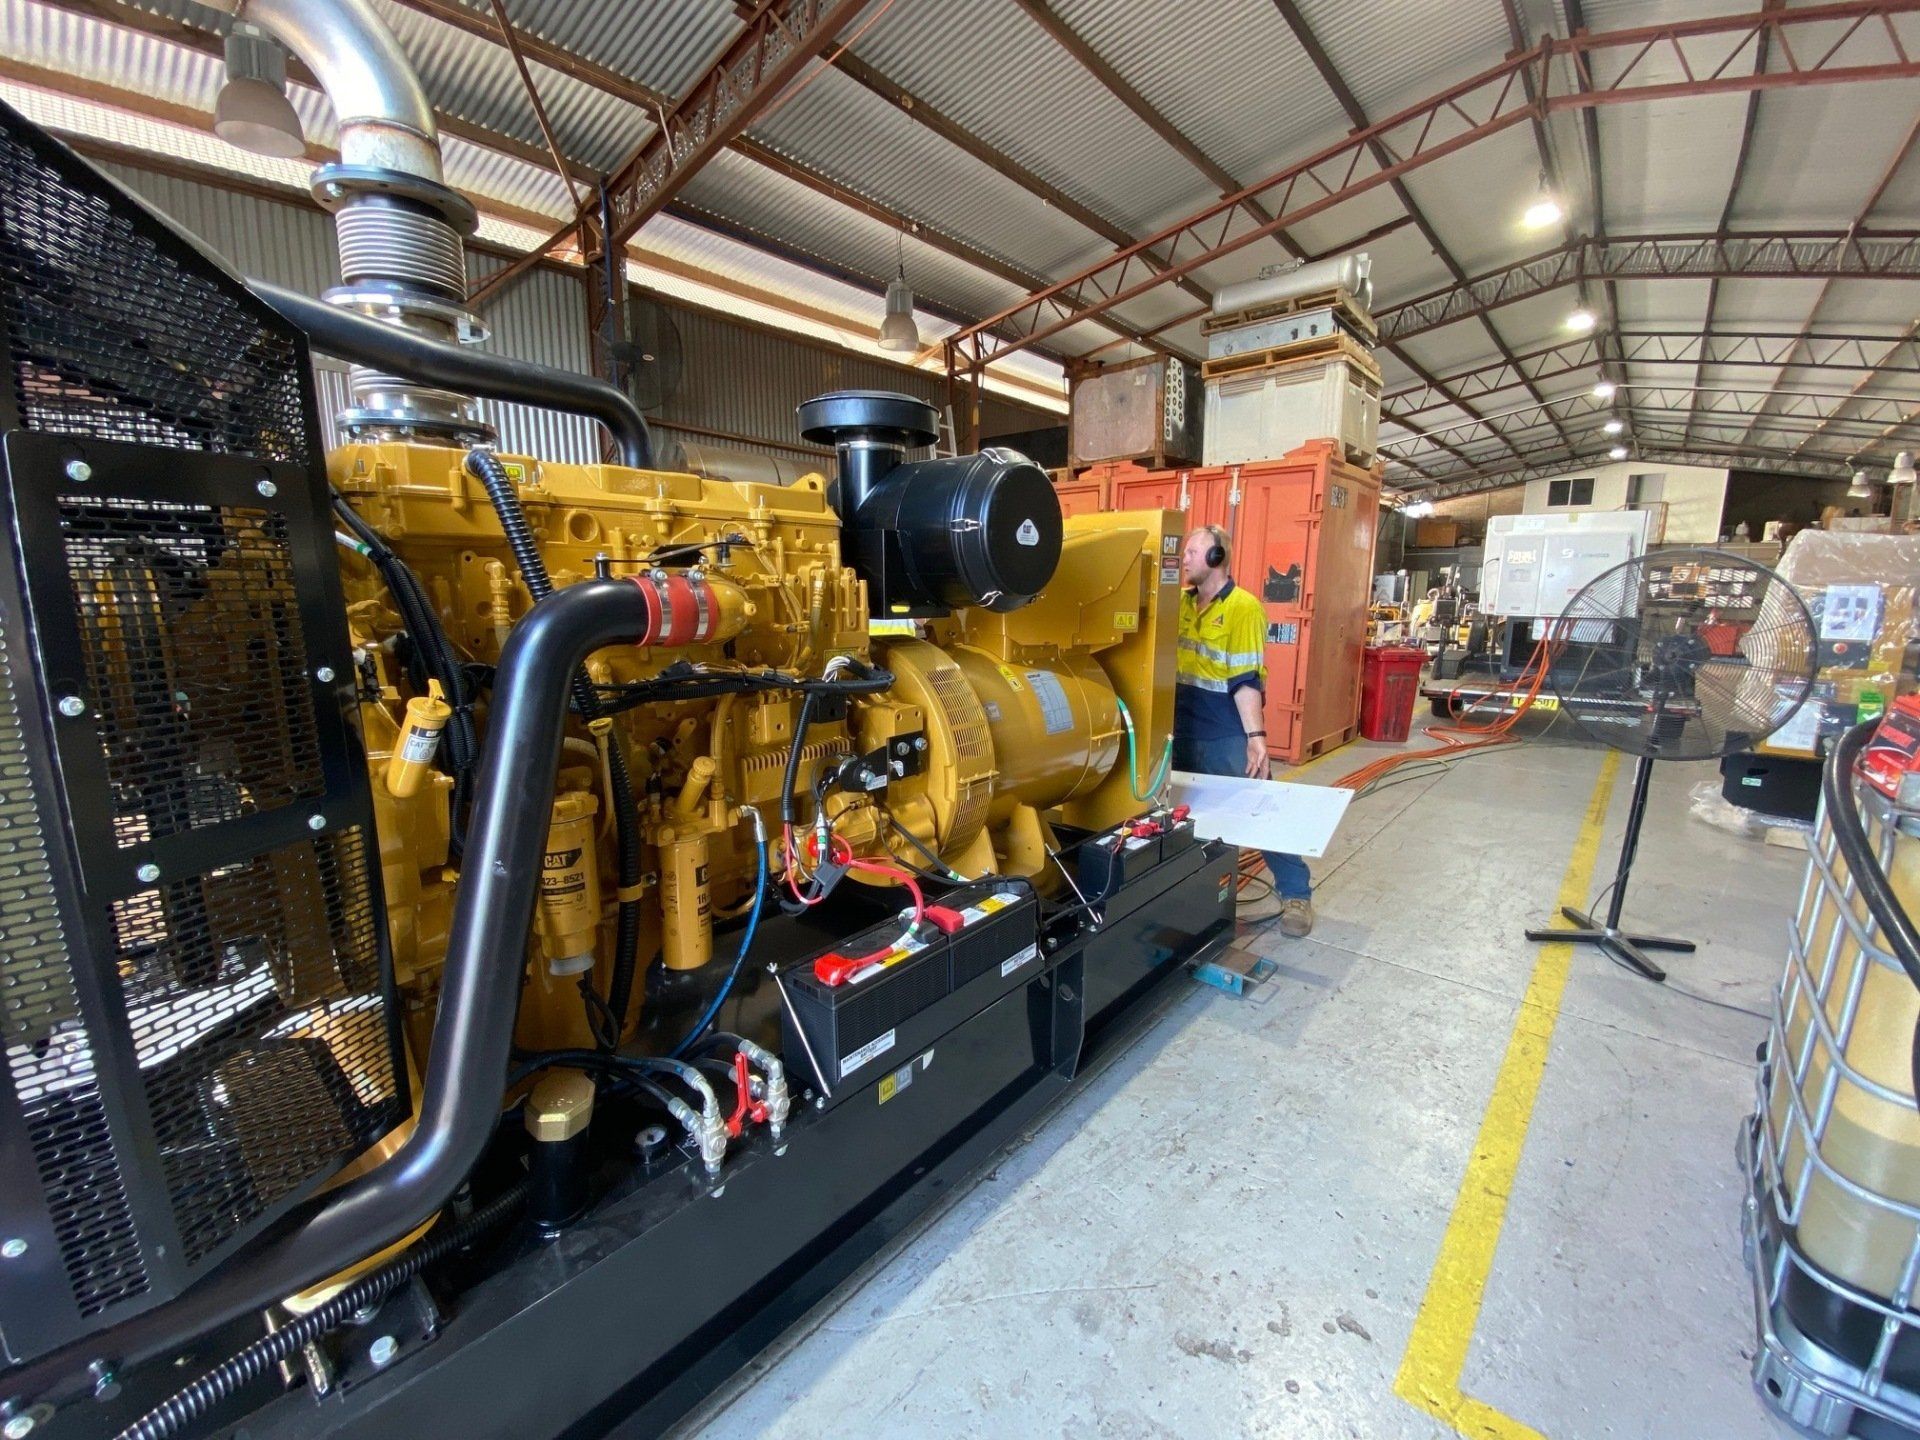 a large yellow engine is sitting in a warehouse .